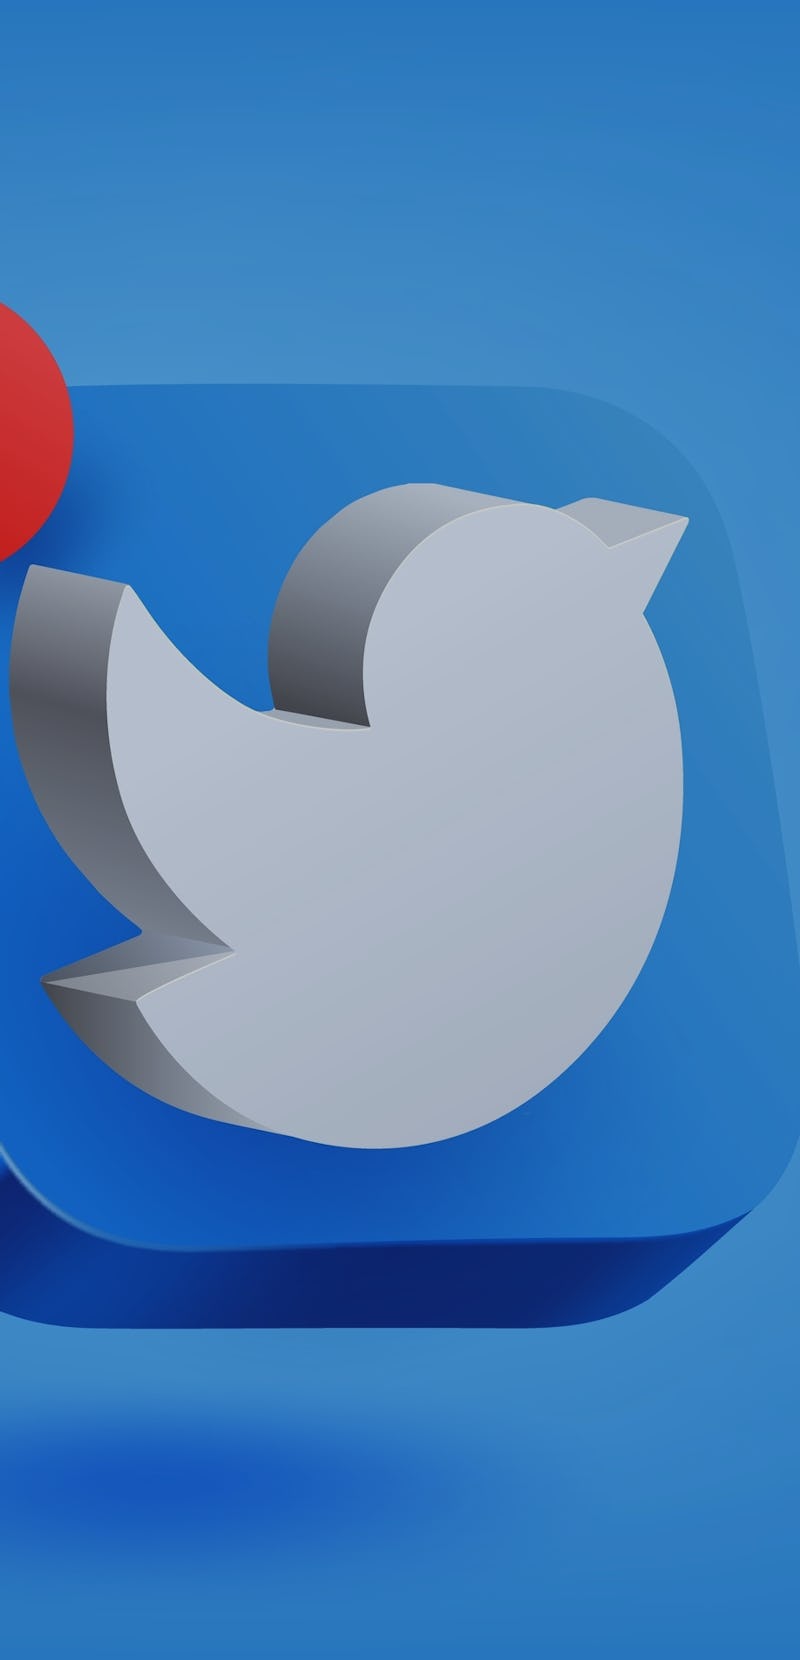 A 3D illustration of the Twitter app icon with one notification in blue and white